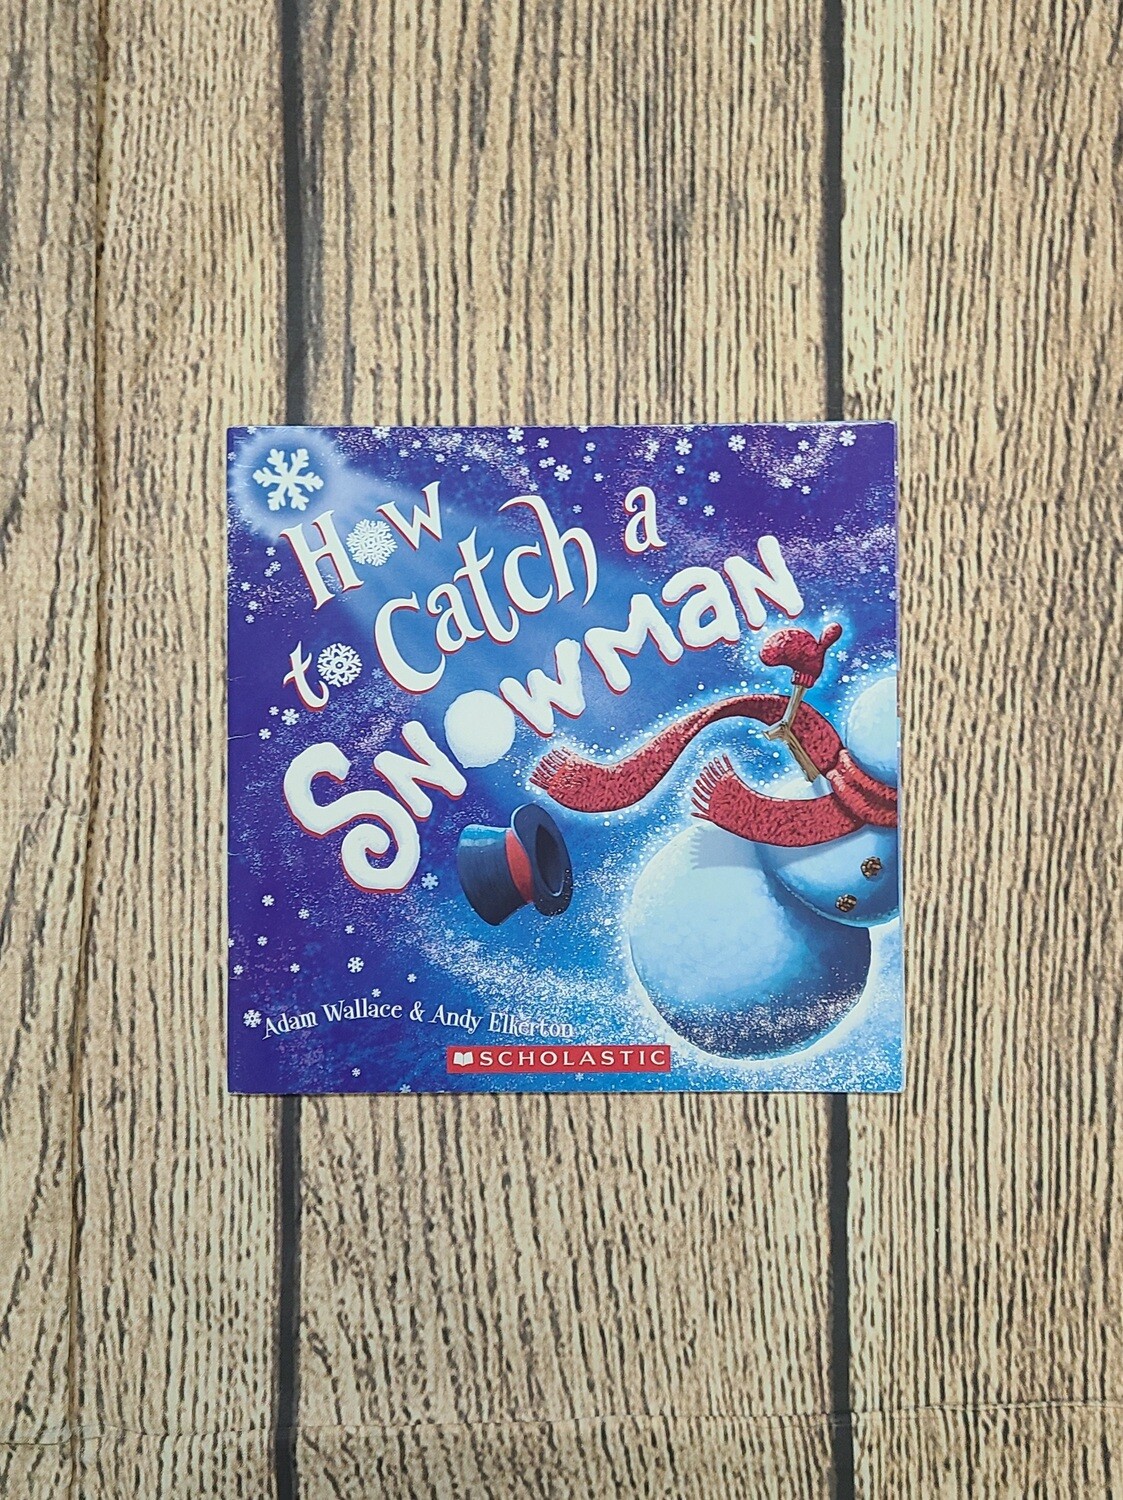 How to Catch a Snowman by Adam Wallace and Andy Elkerton - Paperback - Great Condition